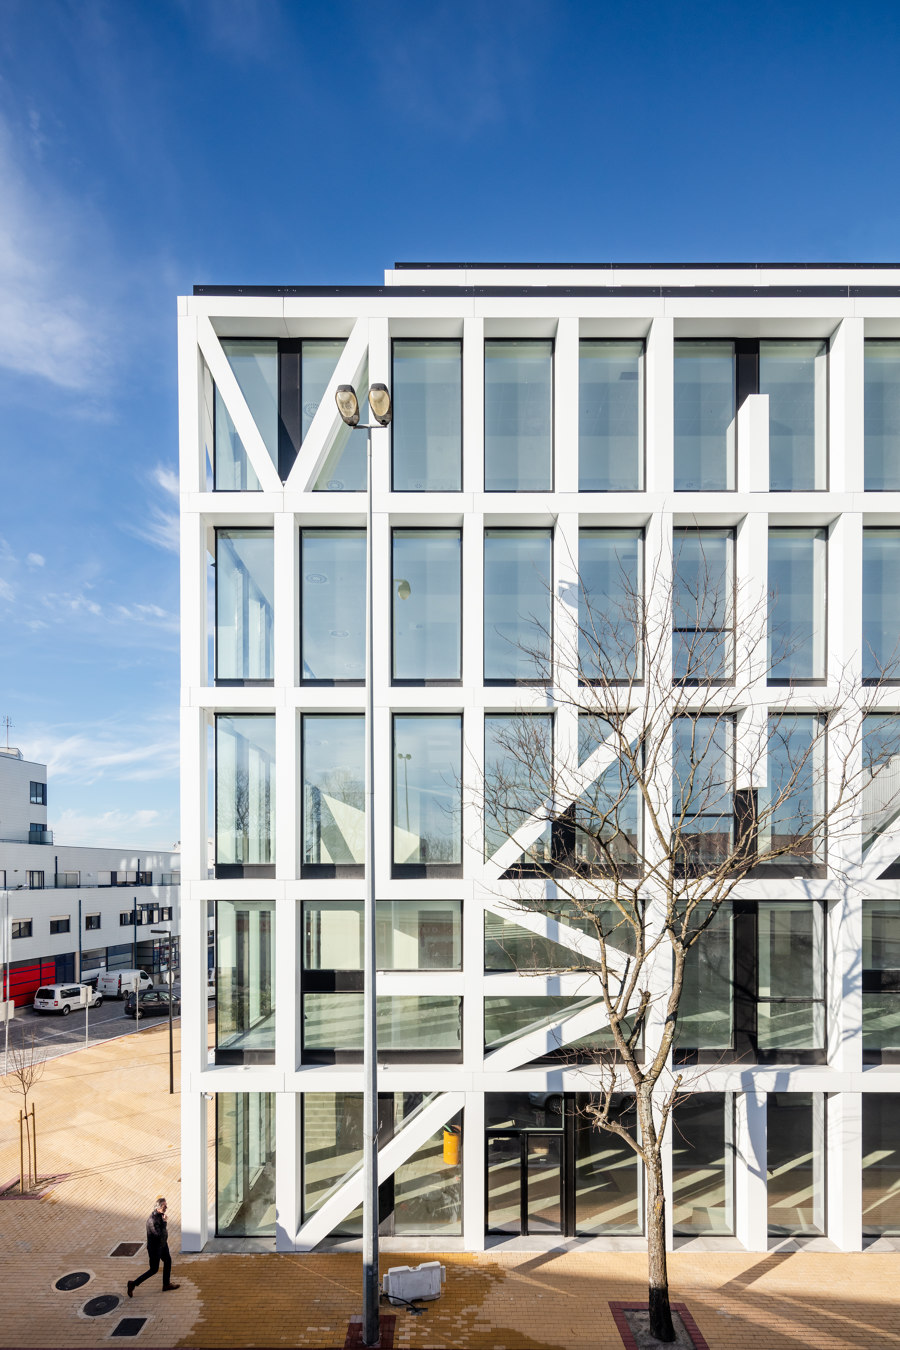 URBO Business Center by Nuno Capa Arquitecto | Office buildings